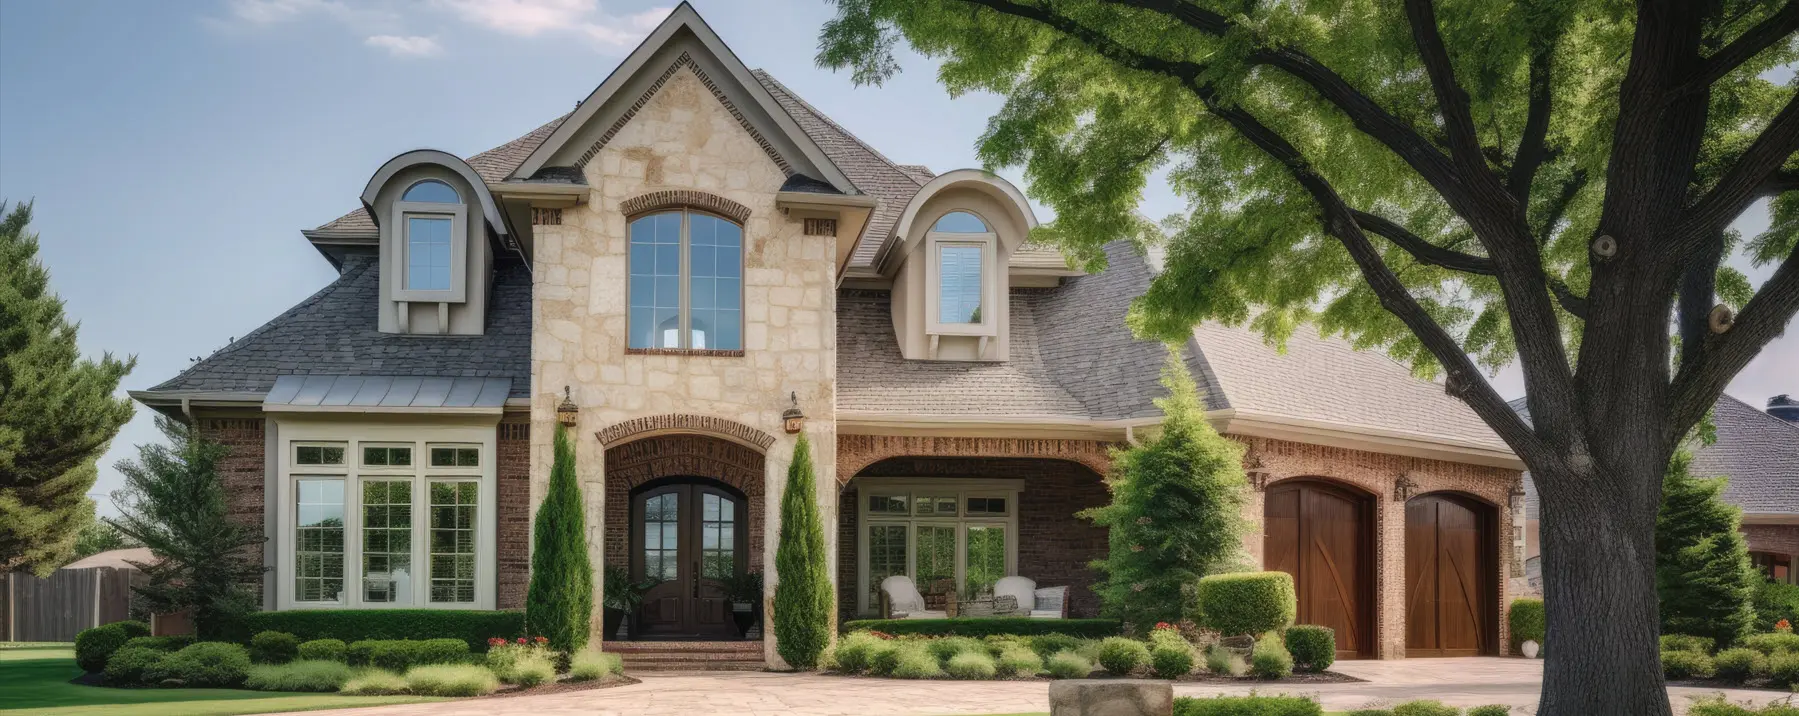 Flower Mound Luxury Real Estate, Homes For Sale